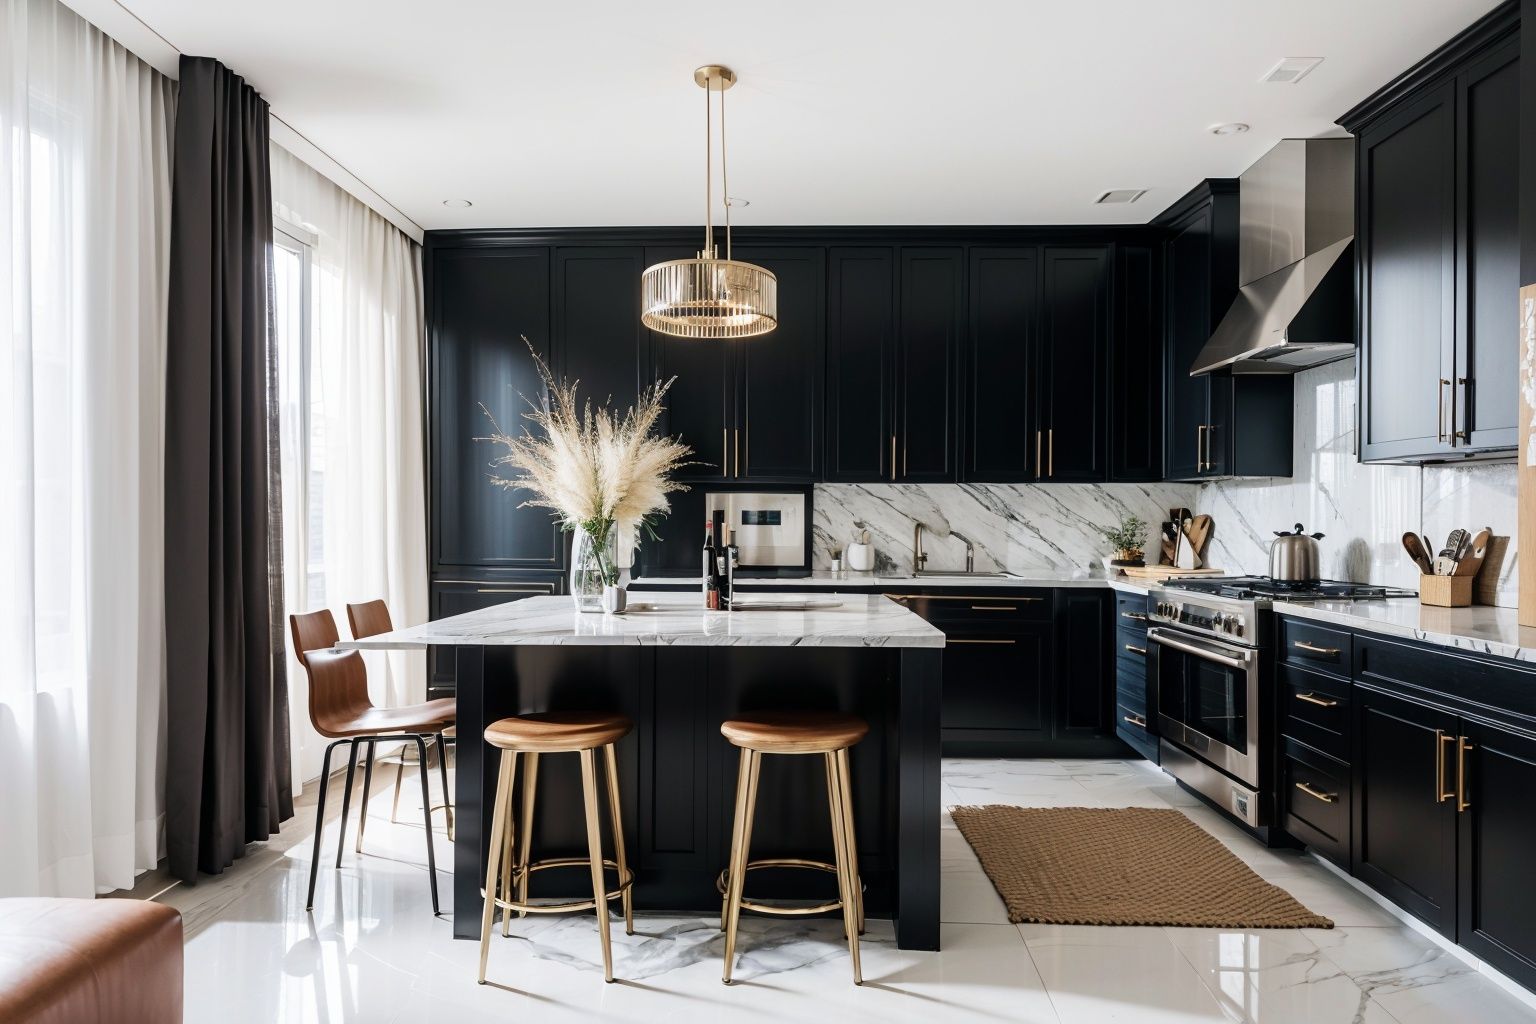 Kitchen, white marble walls, marble floor, black cabinets, metallic texture,
,(masterpiece), (best quality: 1.2), (ultra-high resolution: 1.2), (realistic: 1.2), (8k: 1.2),nsanely detailed, hyper quality, ultra detailed, 
,depth of field